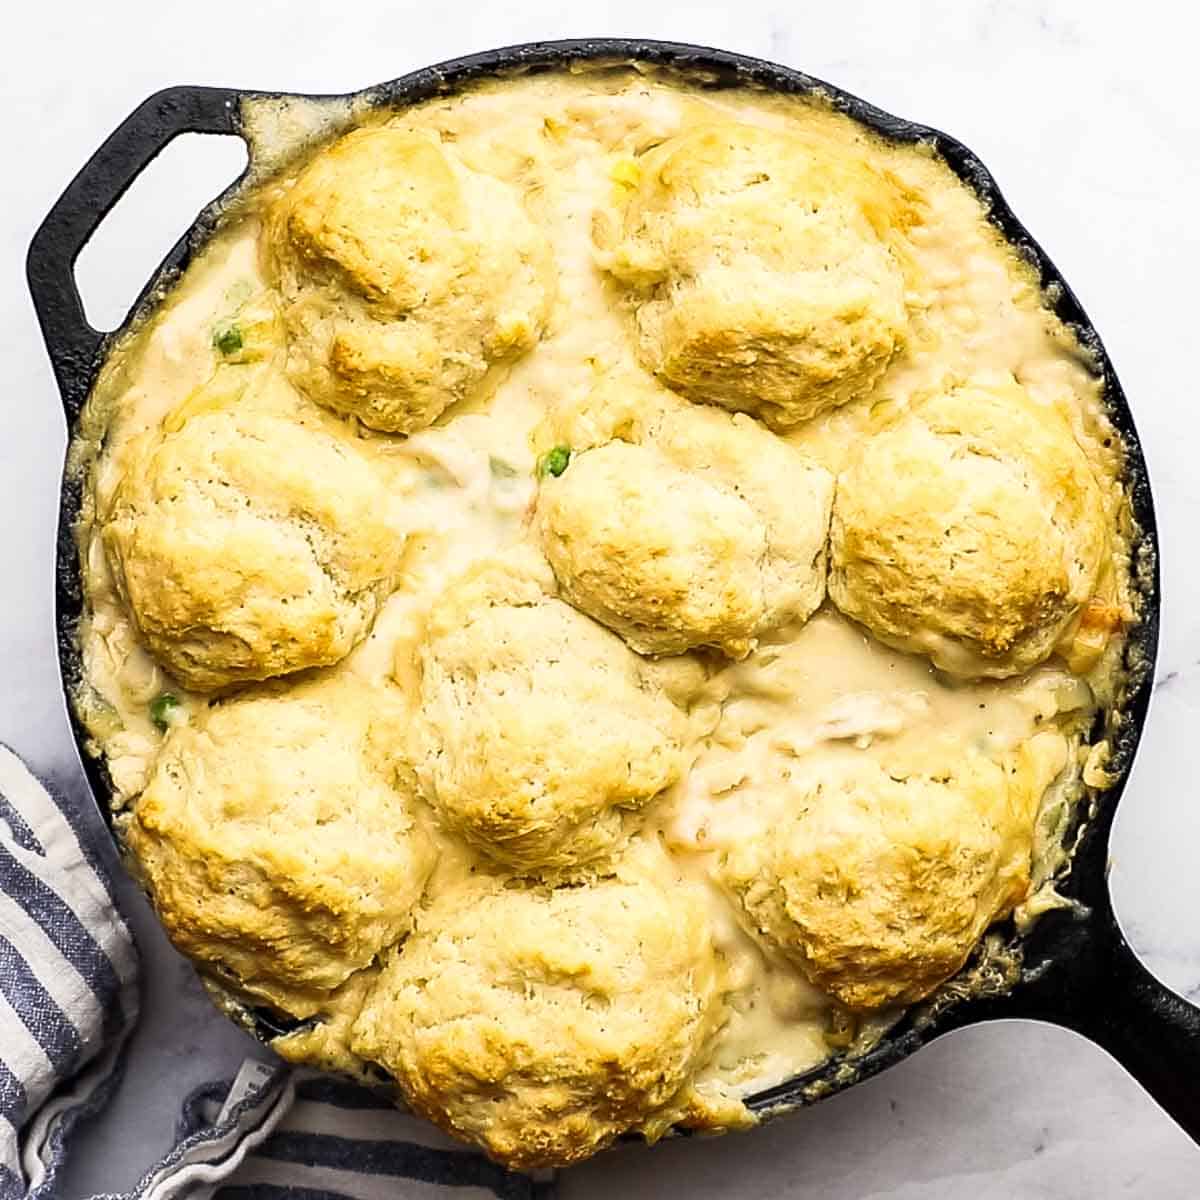 overhead view of freshly baked skillet pot pie with golden brown biscuits on top